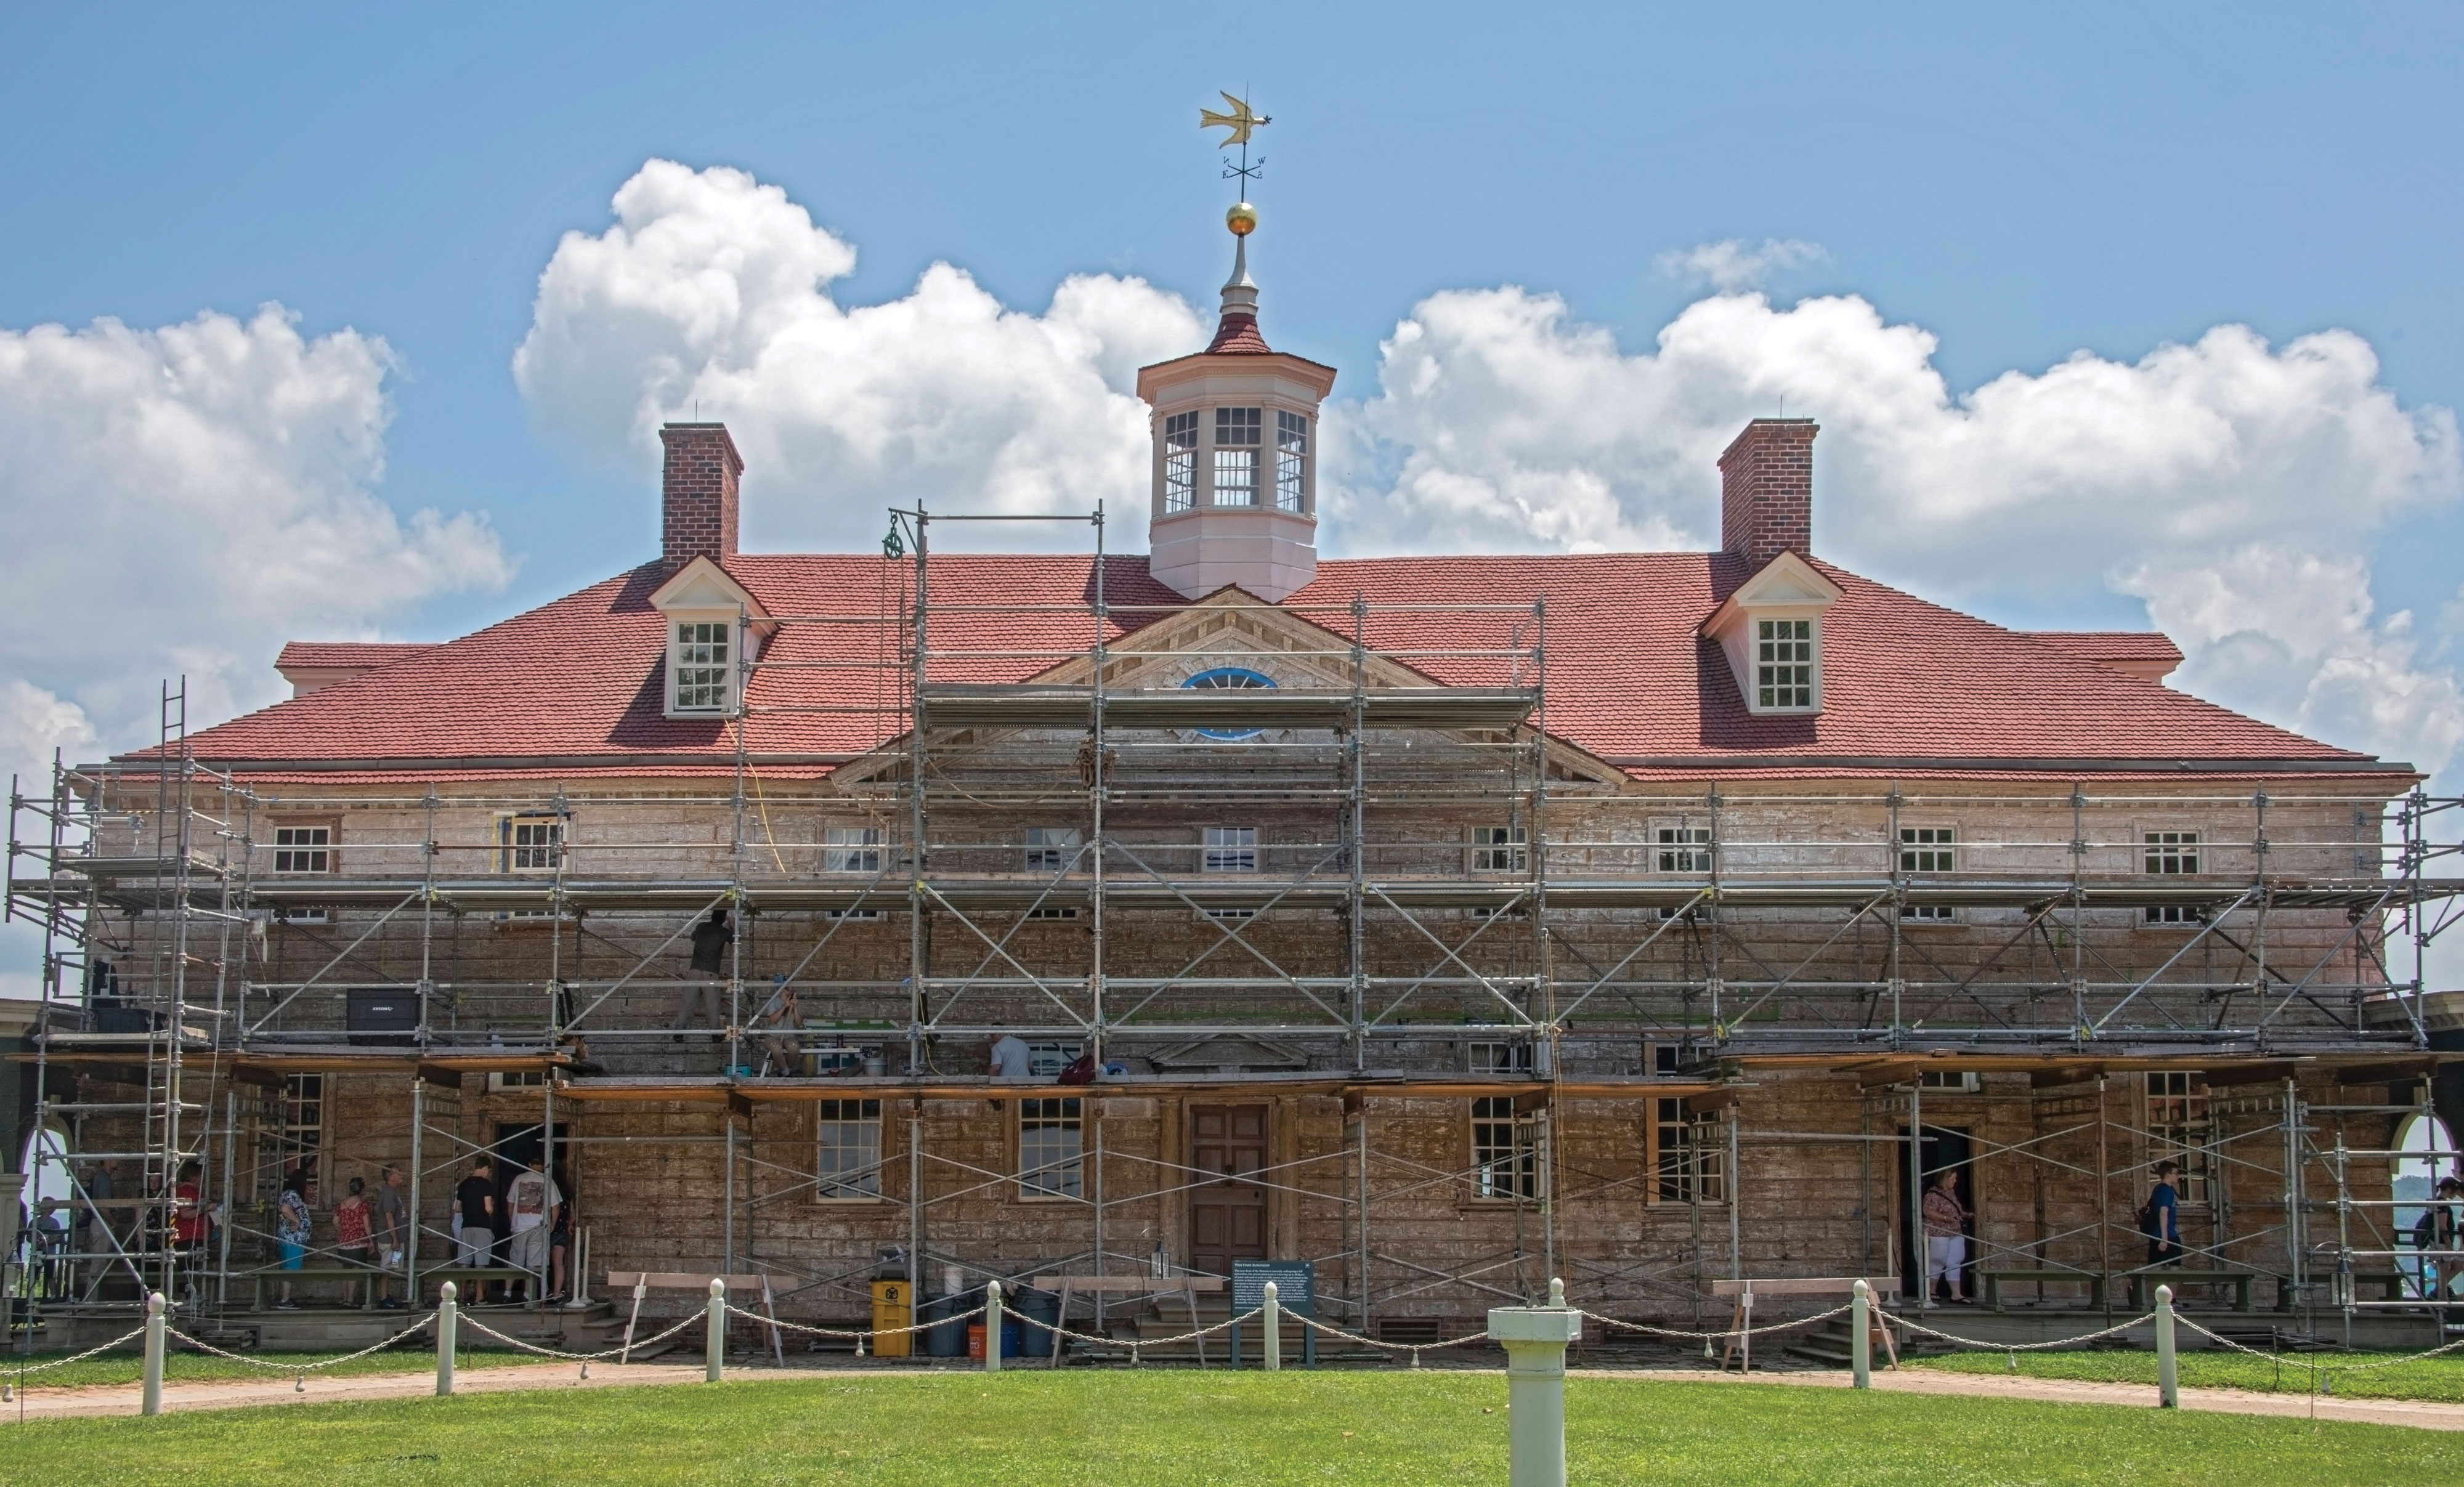 The west front of the Mansion with full scaffolding.